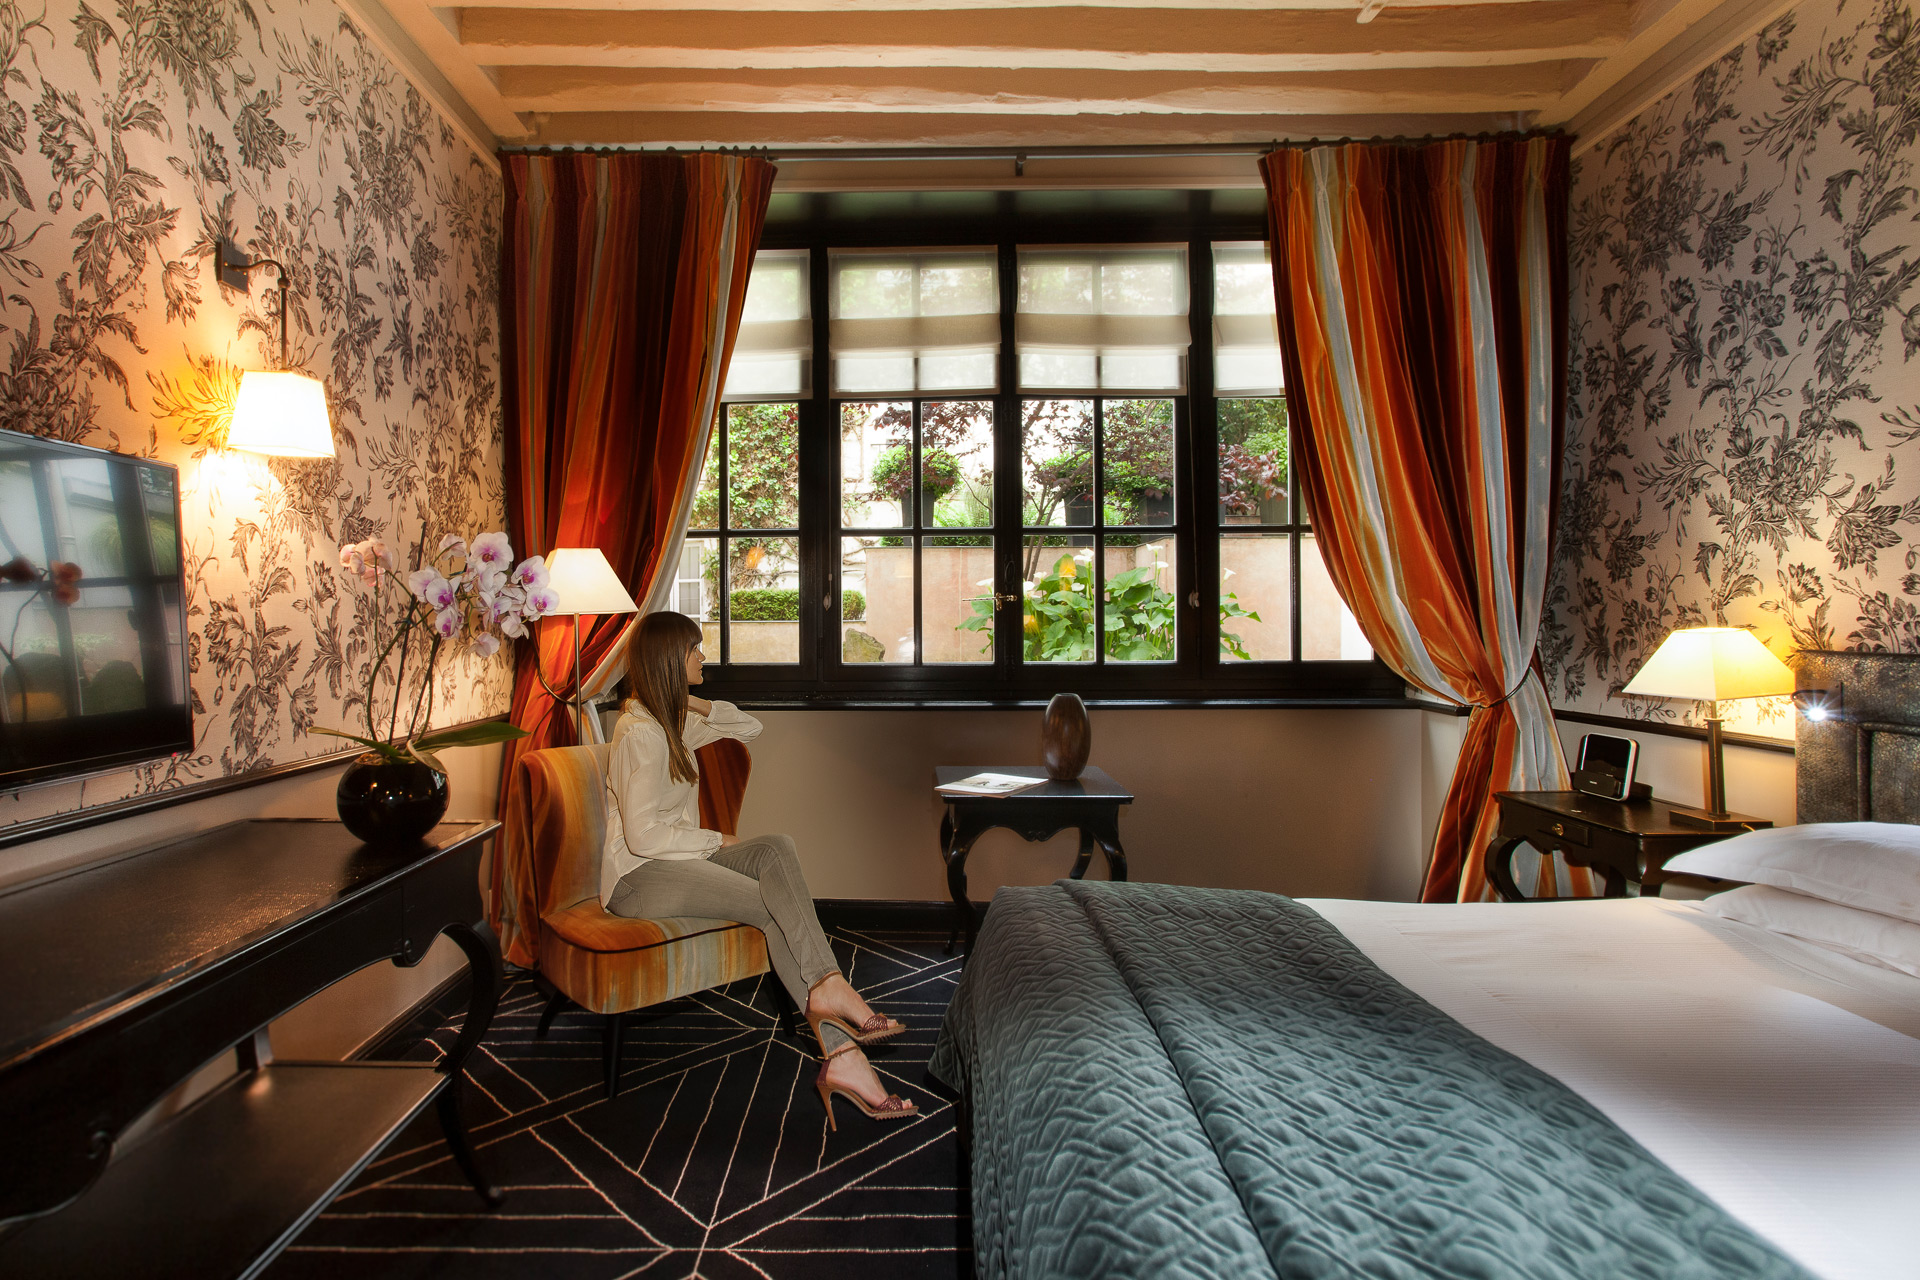 Bedroom at Pavillion de la Reine with floral wallpaper, a green throw on the bed, and orange curtains